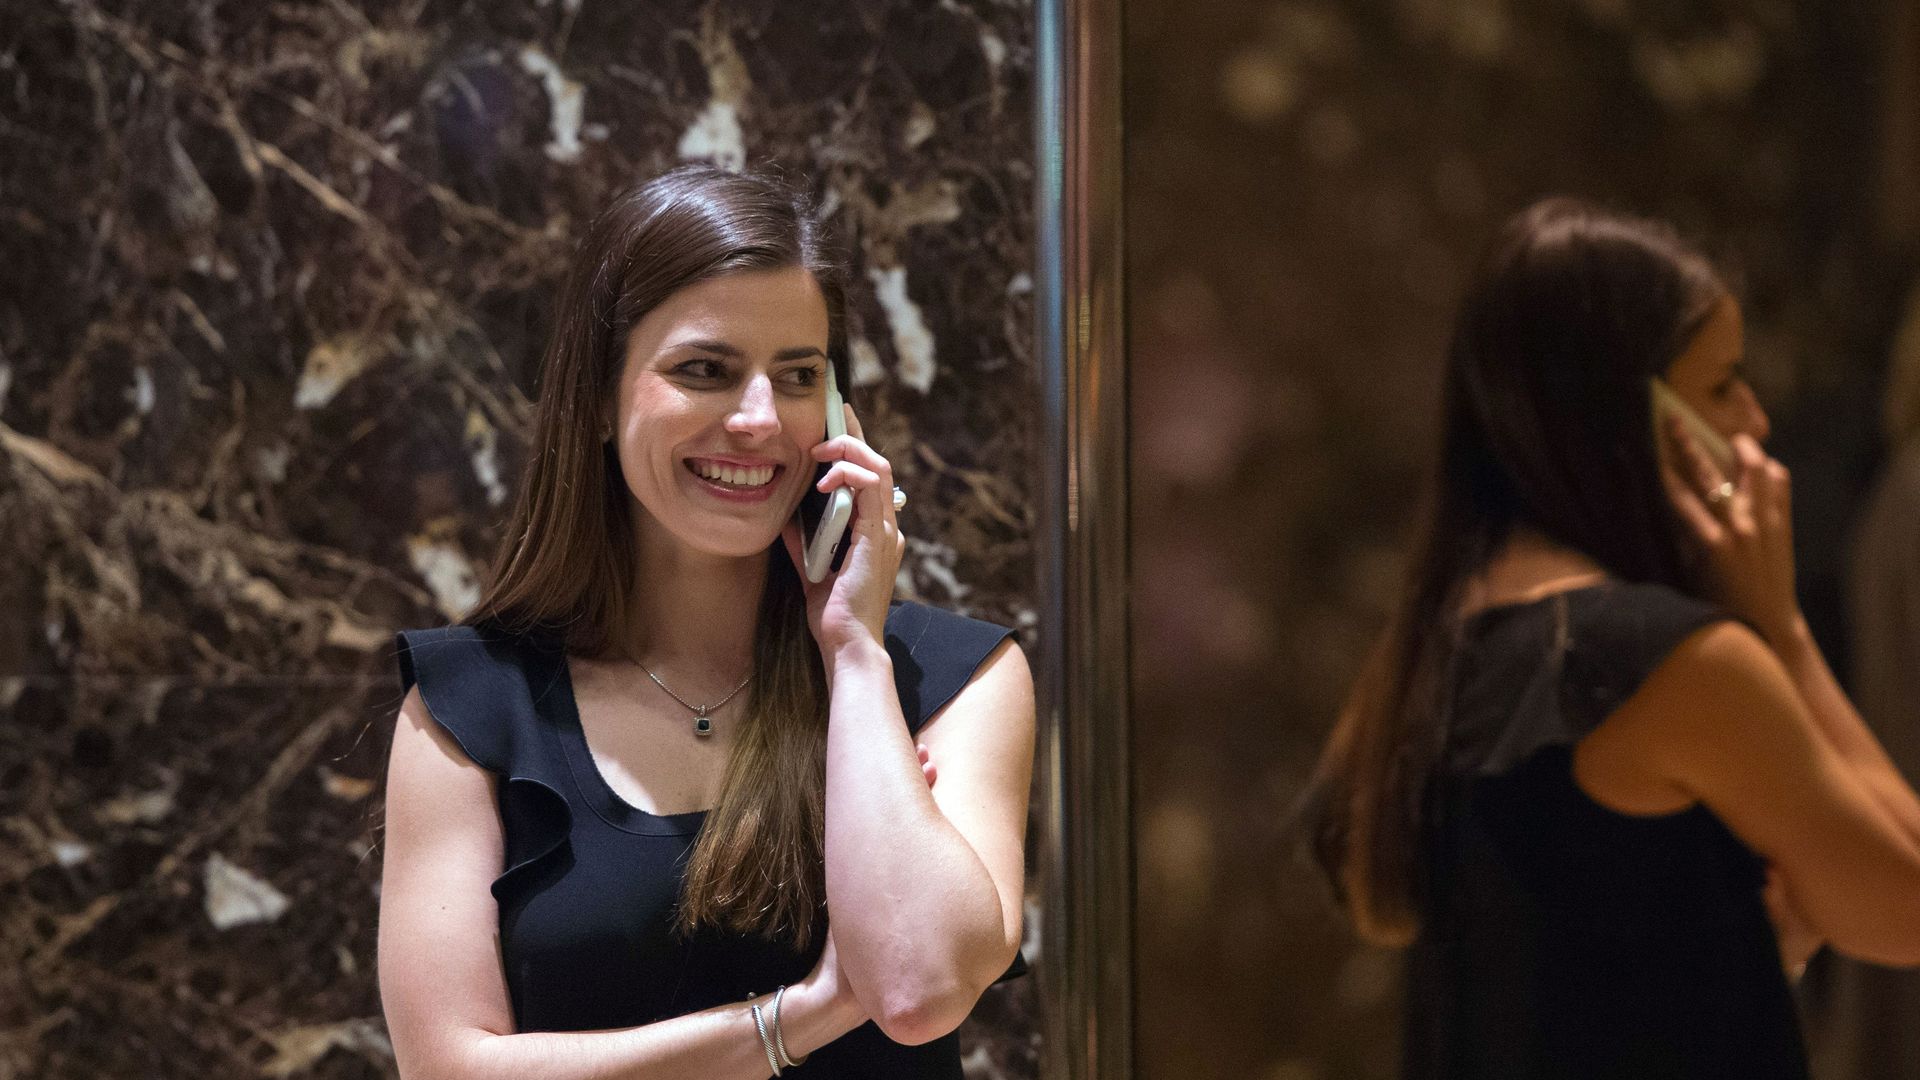 Trump personal assistant Madeleine Westerhout abruptly resigns